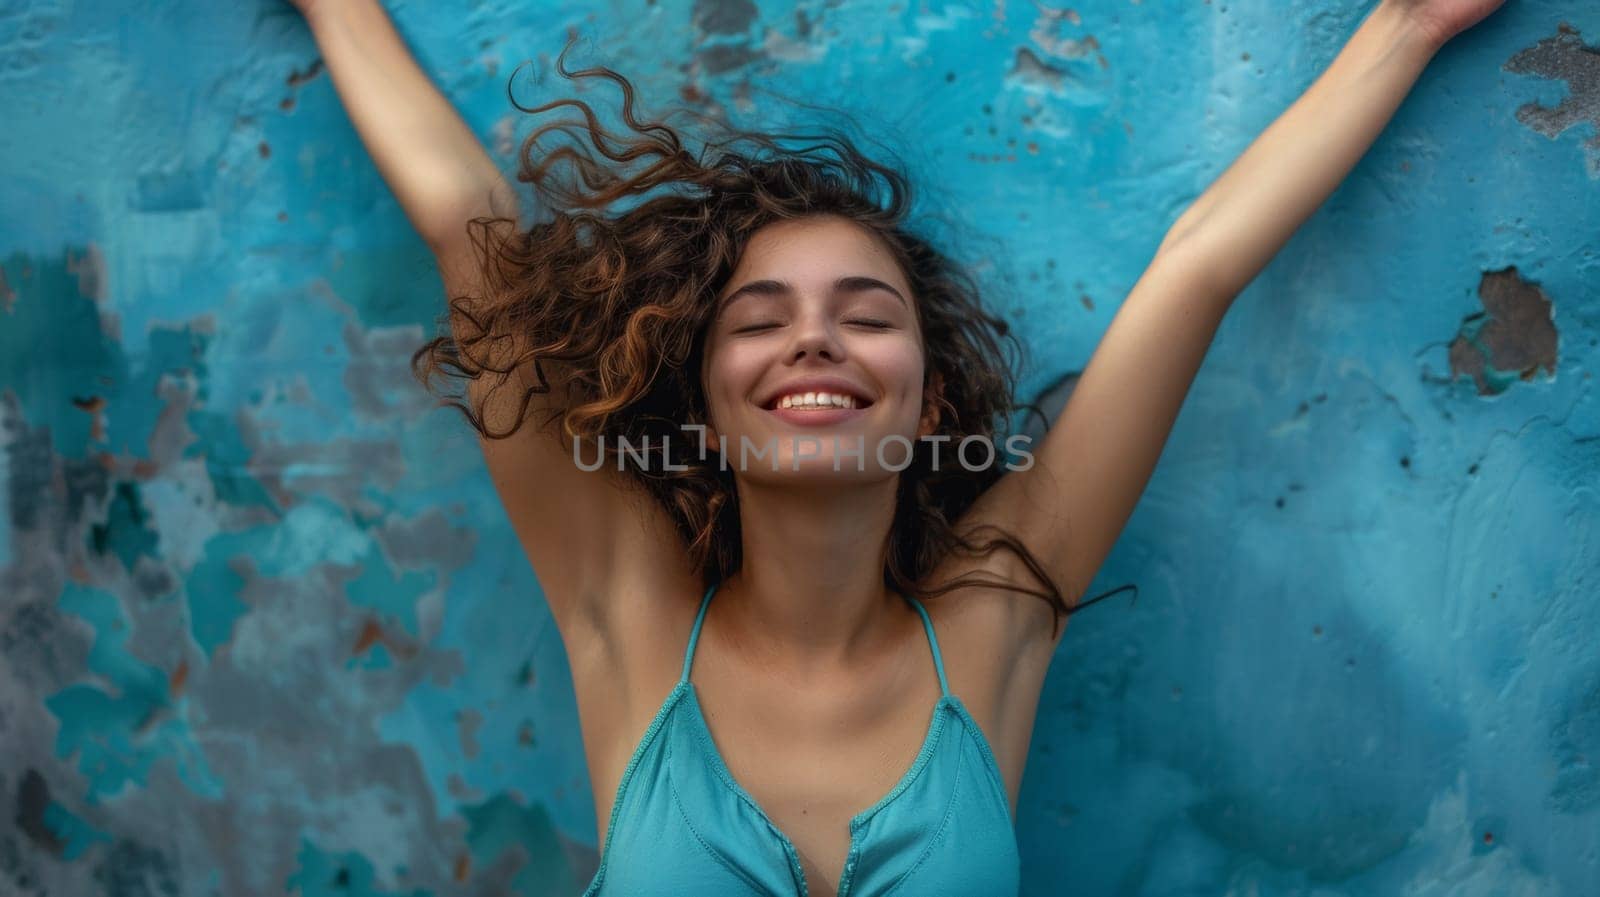 A woman in a blue bikini smiling with her arms outstretched, AI by starush